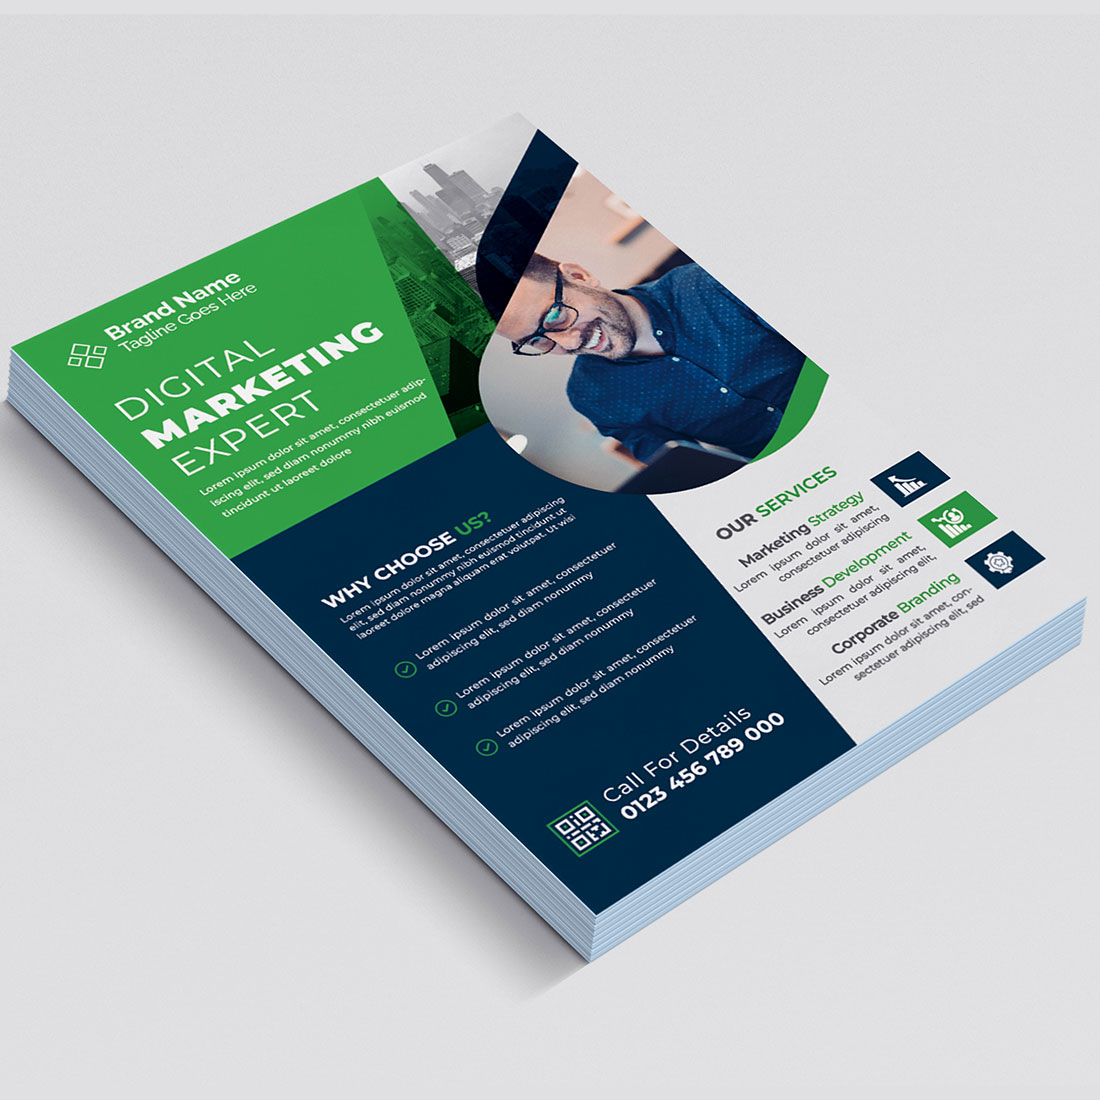 Brochure with a green and blue design.